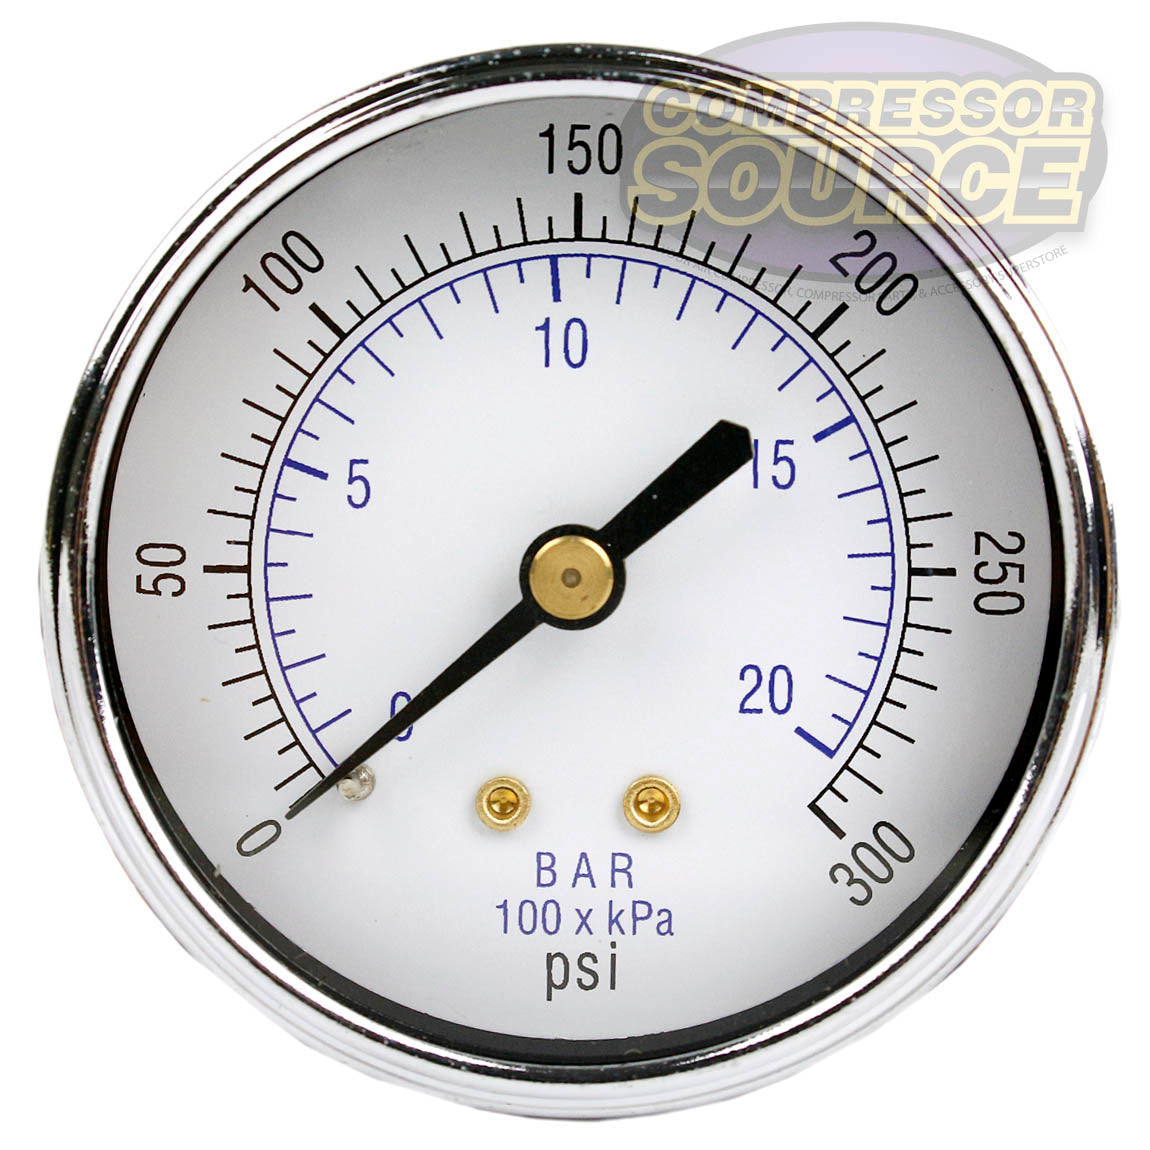 1/4" NPT 0-300 PSI Air Pressure Gauge Center Back Mount With 2.5" Face